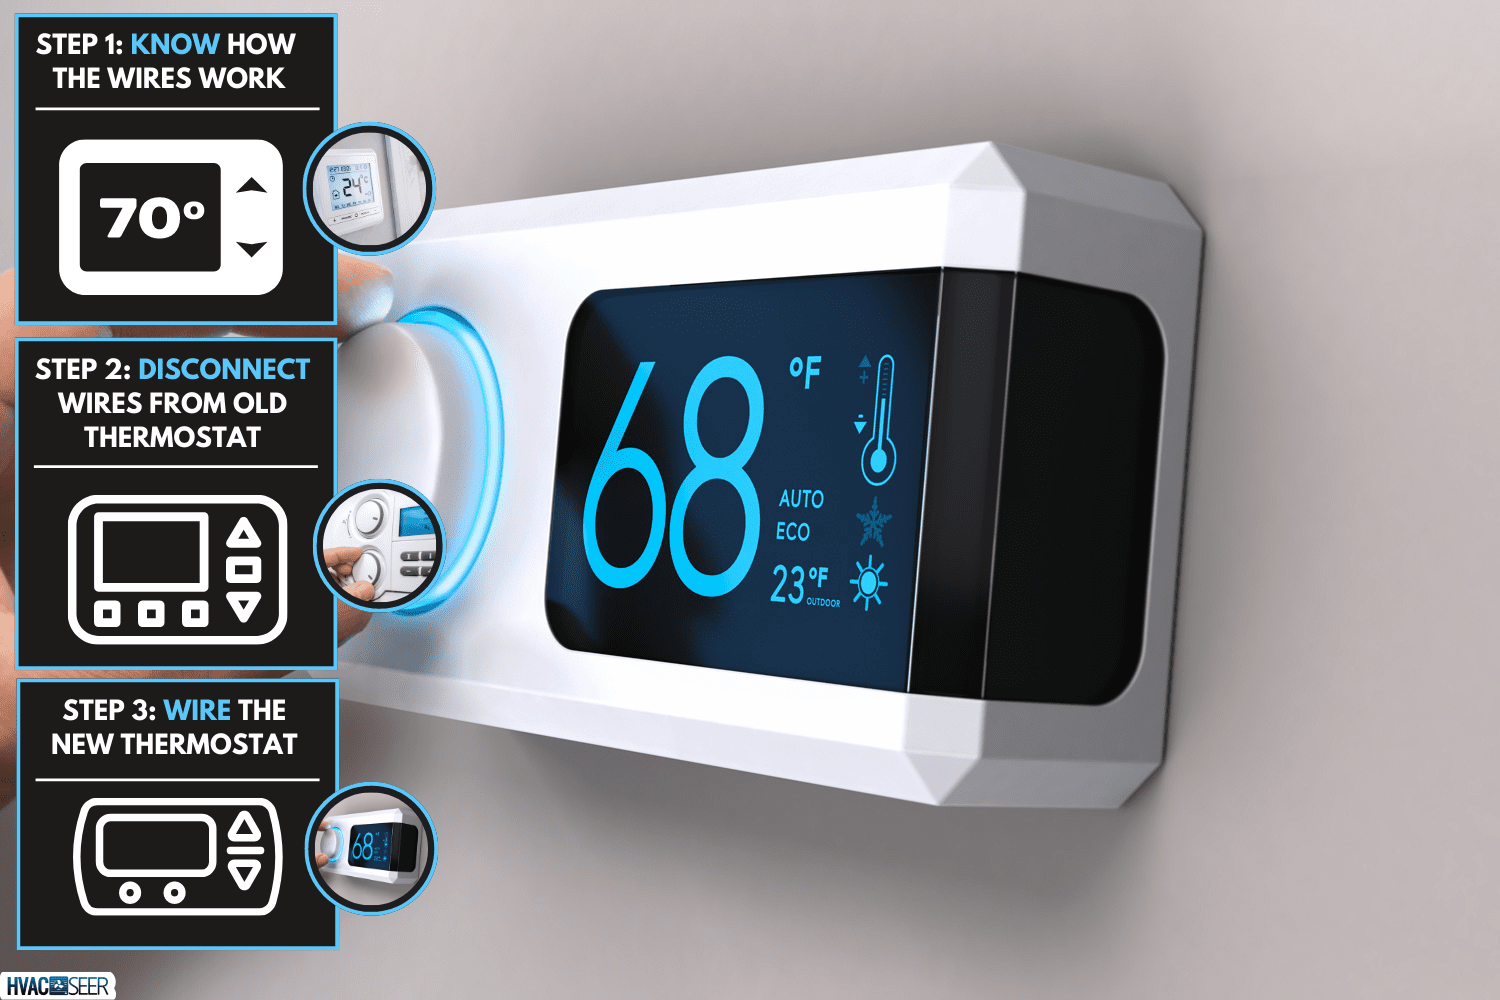 Hand turning a home thermostat knob to set temperature on energy saving mode. fahrenheit units. Composite image between a photography and a 3D background. - Carrier Heat Pump Thermostat Wiring - How To Guide